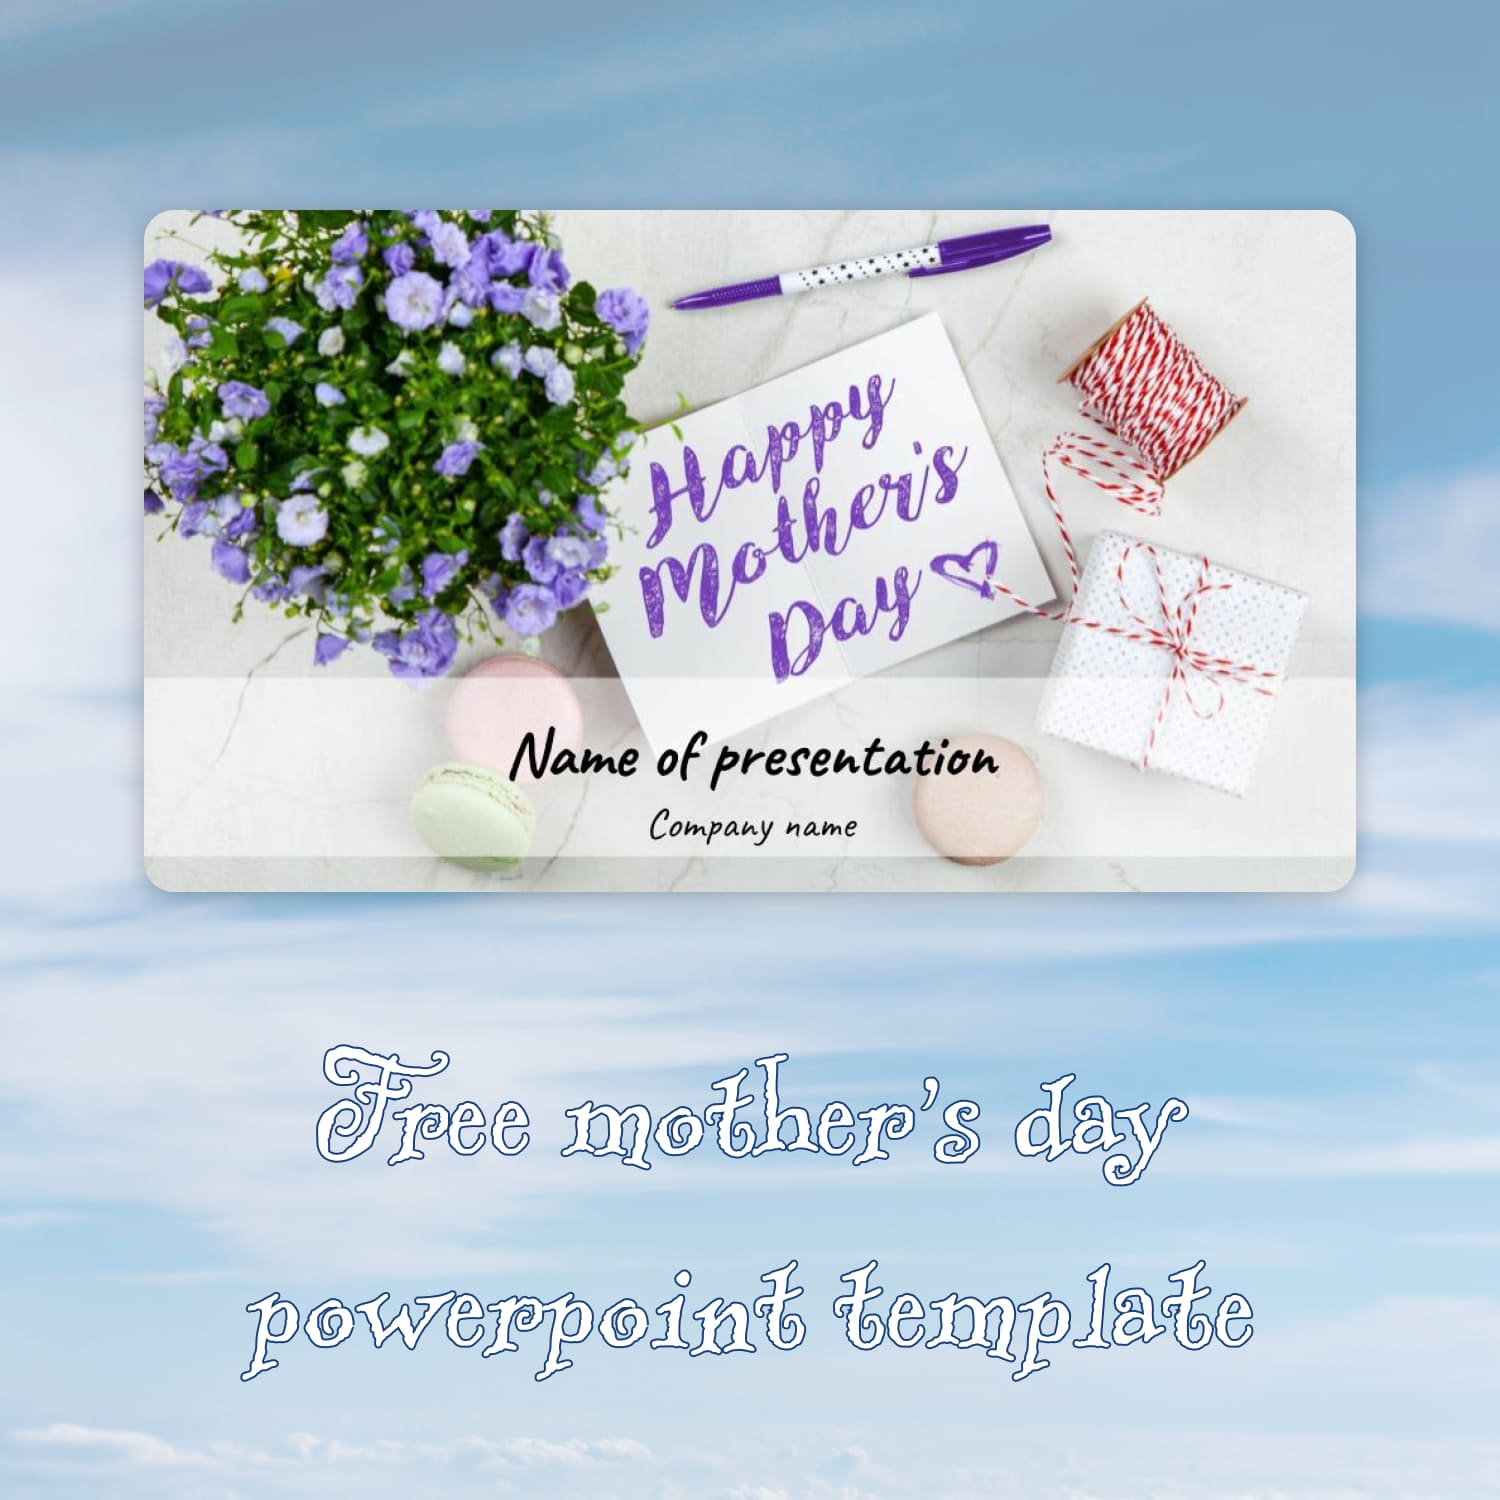 Preview Mothers Day Powerpoint Template.